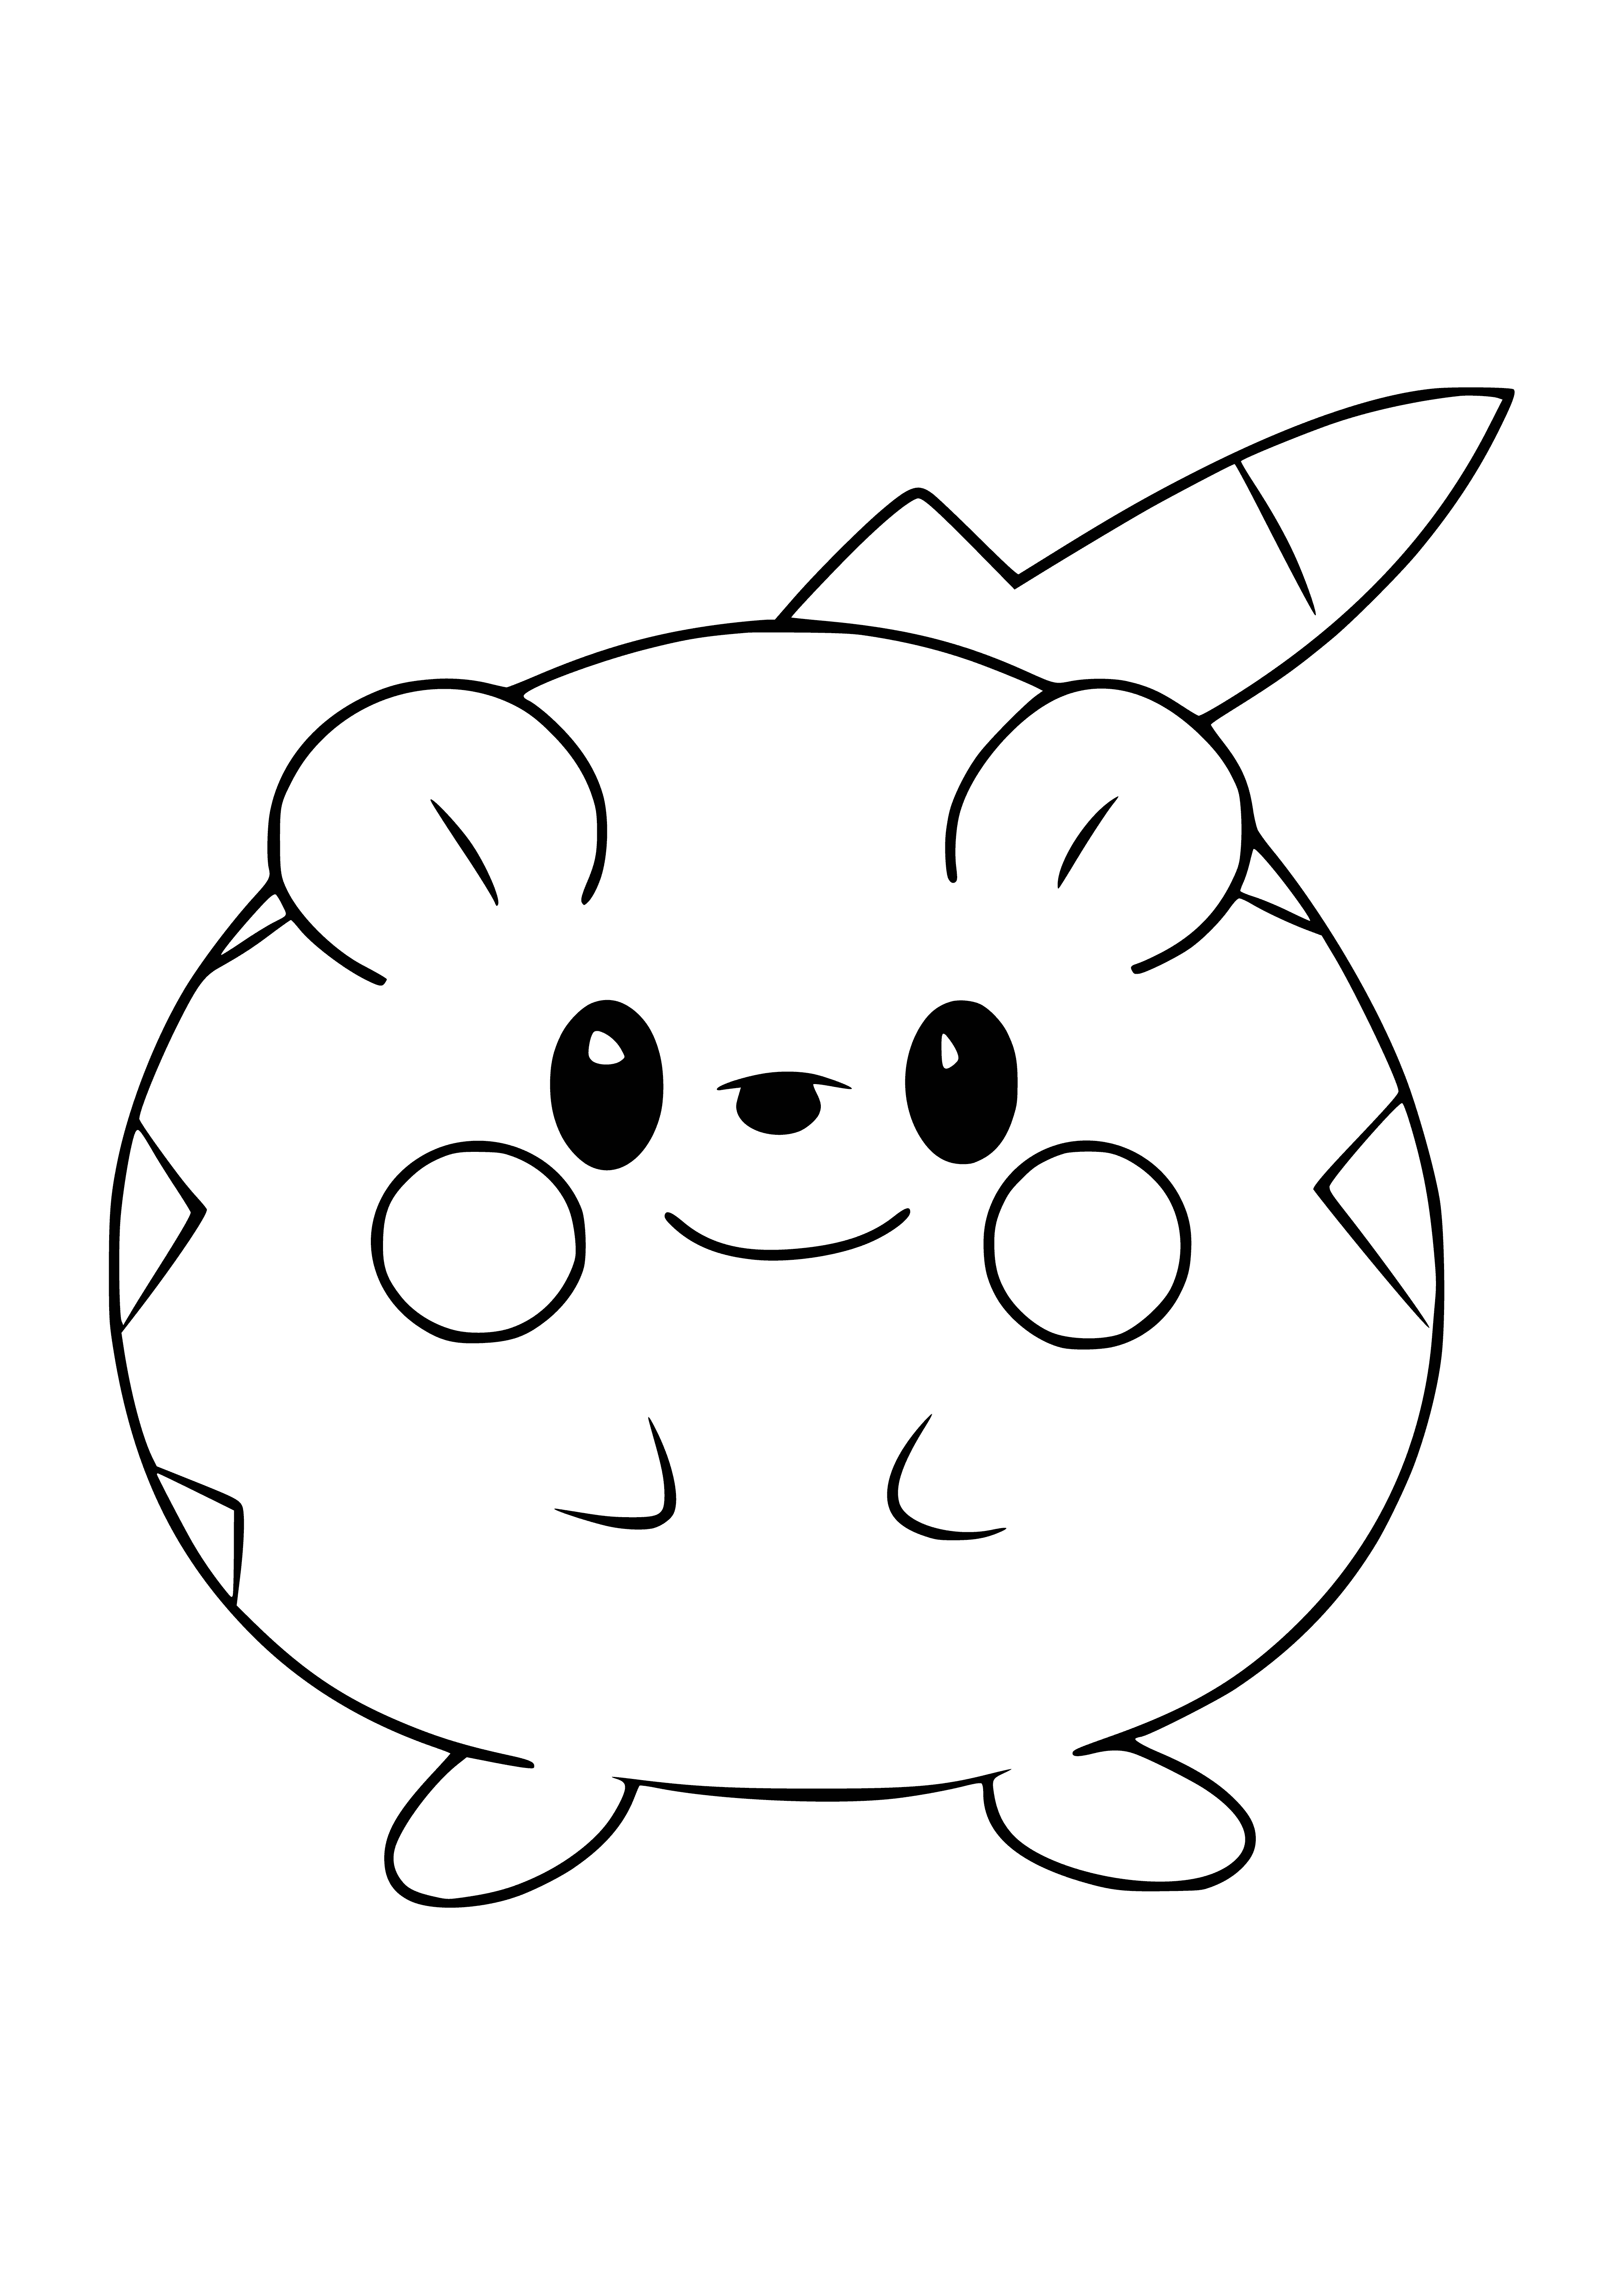 coloring page: Small, spiky, round Pokemon w/ brown body, cream underbelly, black stripes, line, 2 big eyes, small nose, wide mouth, hanging tongue, 2 small ears, & short, stubby arms/legs ending in spiky tips.